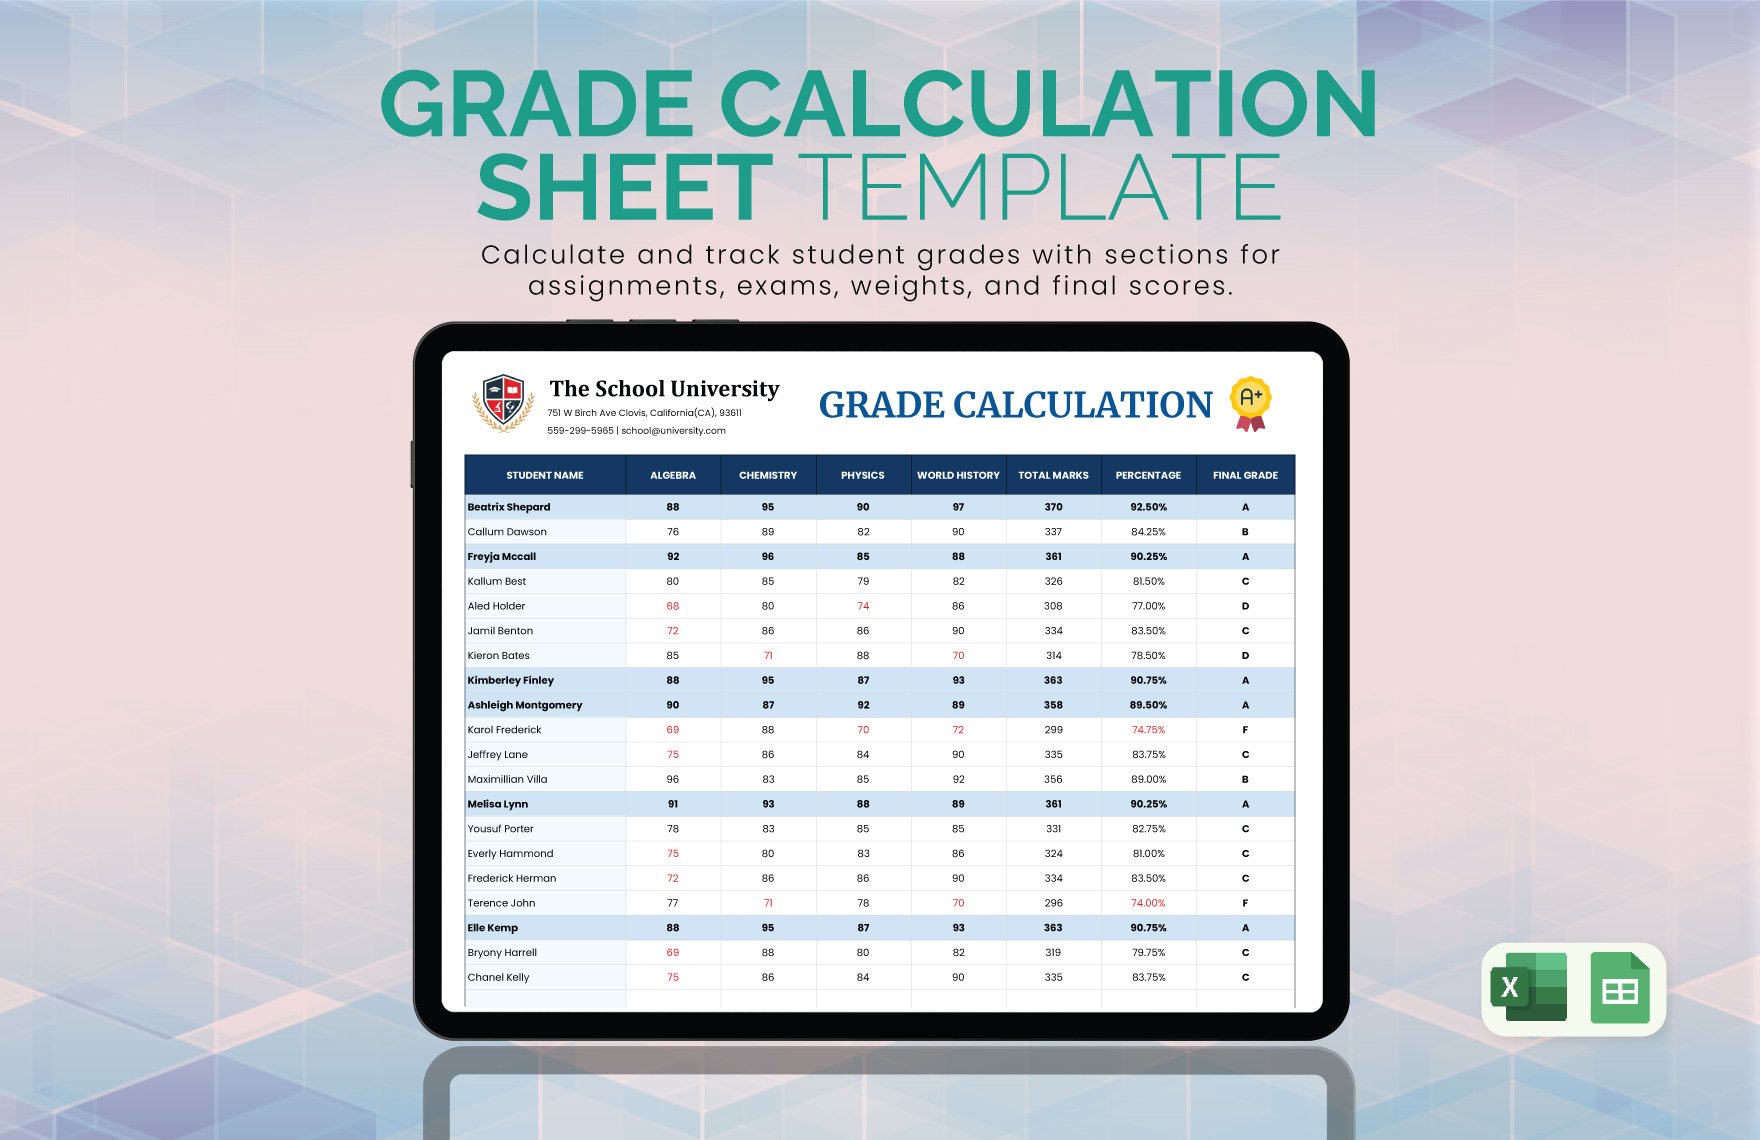 Grade Calculation Sheet Template in Excel, Google Sheets